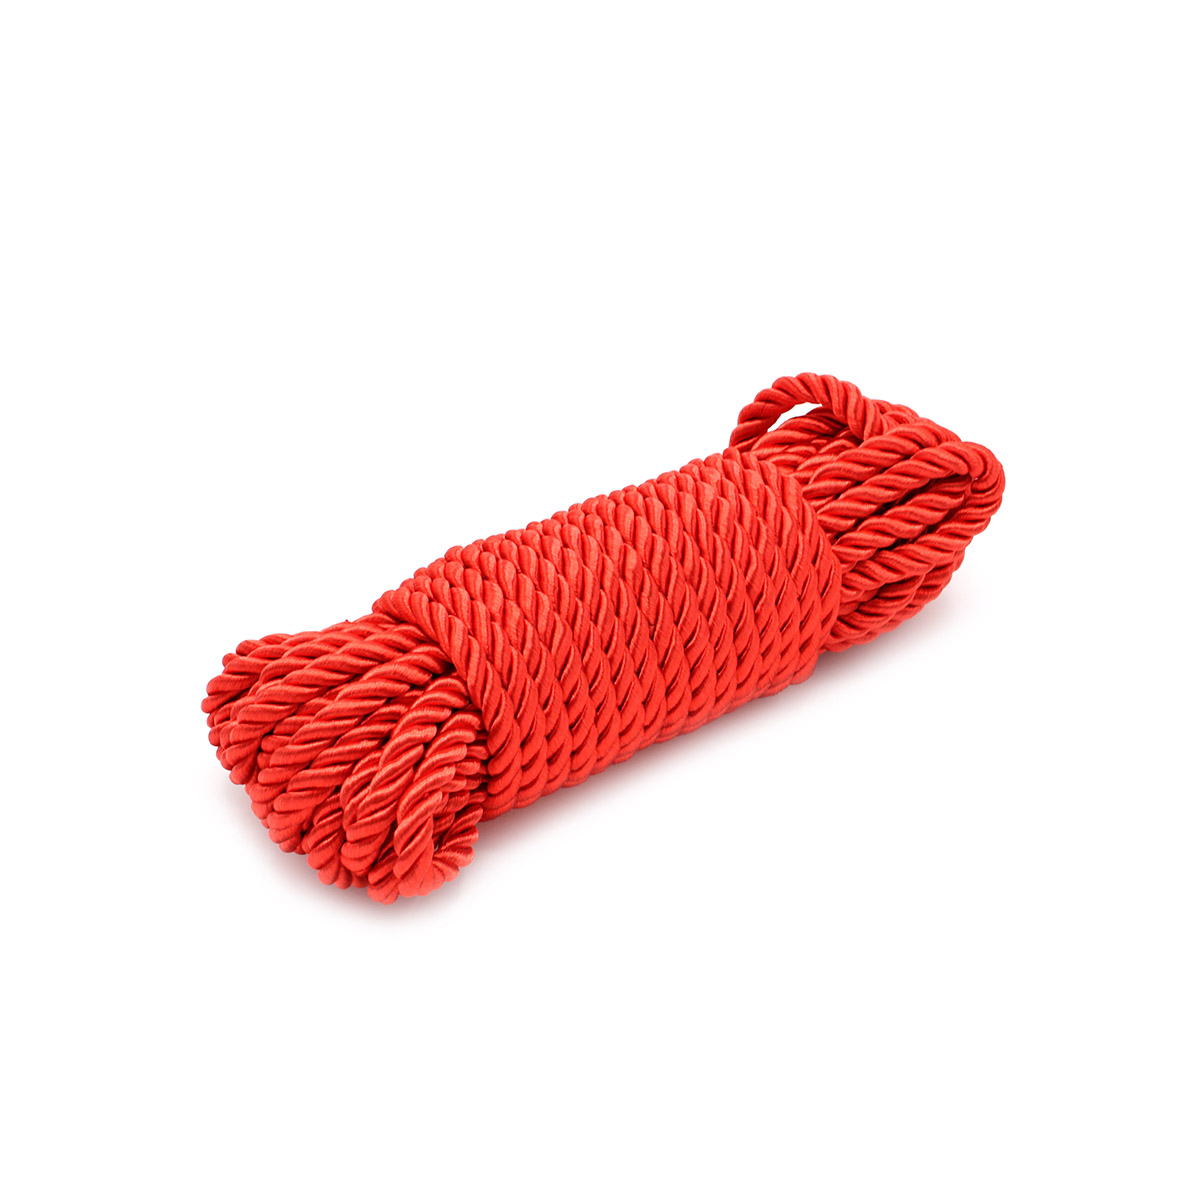 Deluxe Bondage Rope 10 M – Red